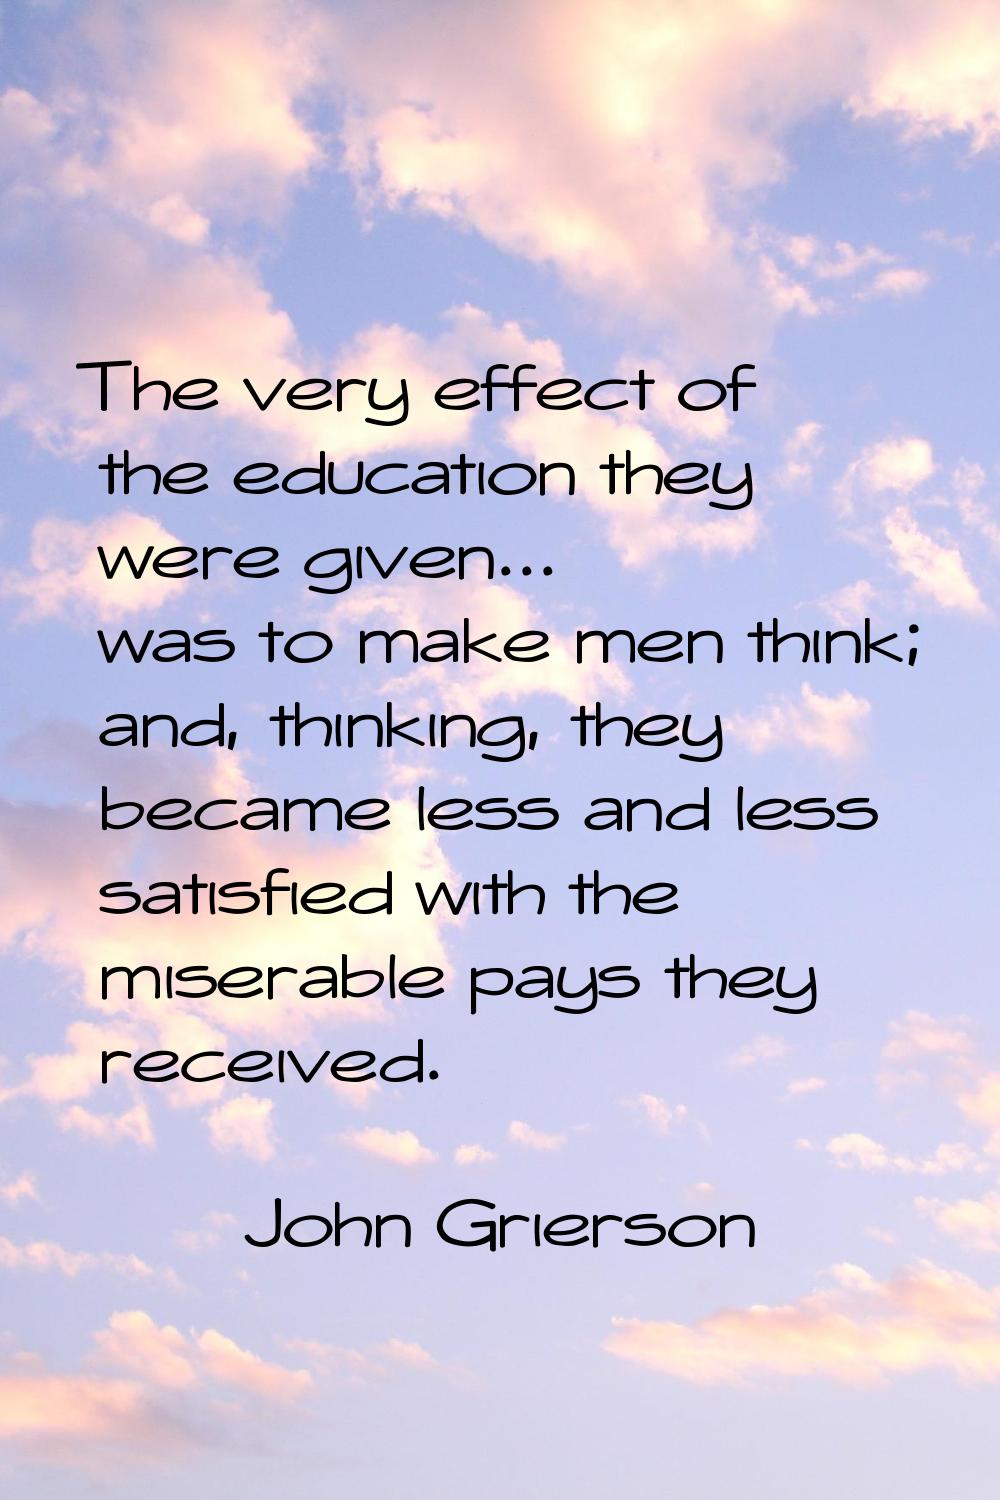 The very effect of the education they were given... was to make men think; and, thinking, they beca